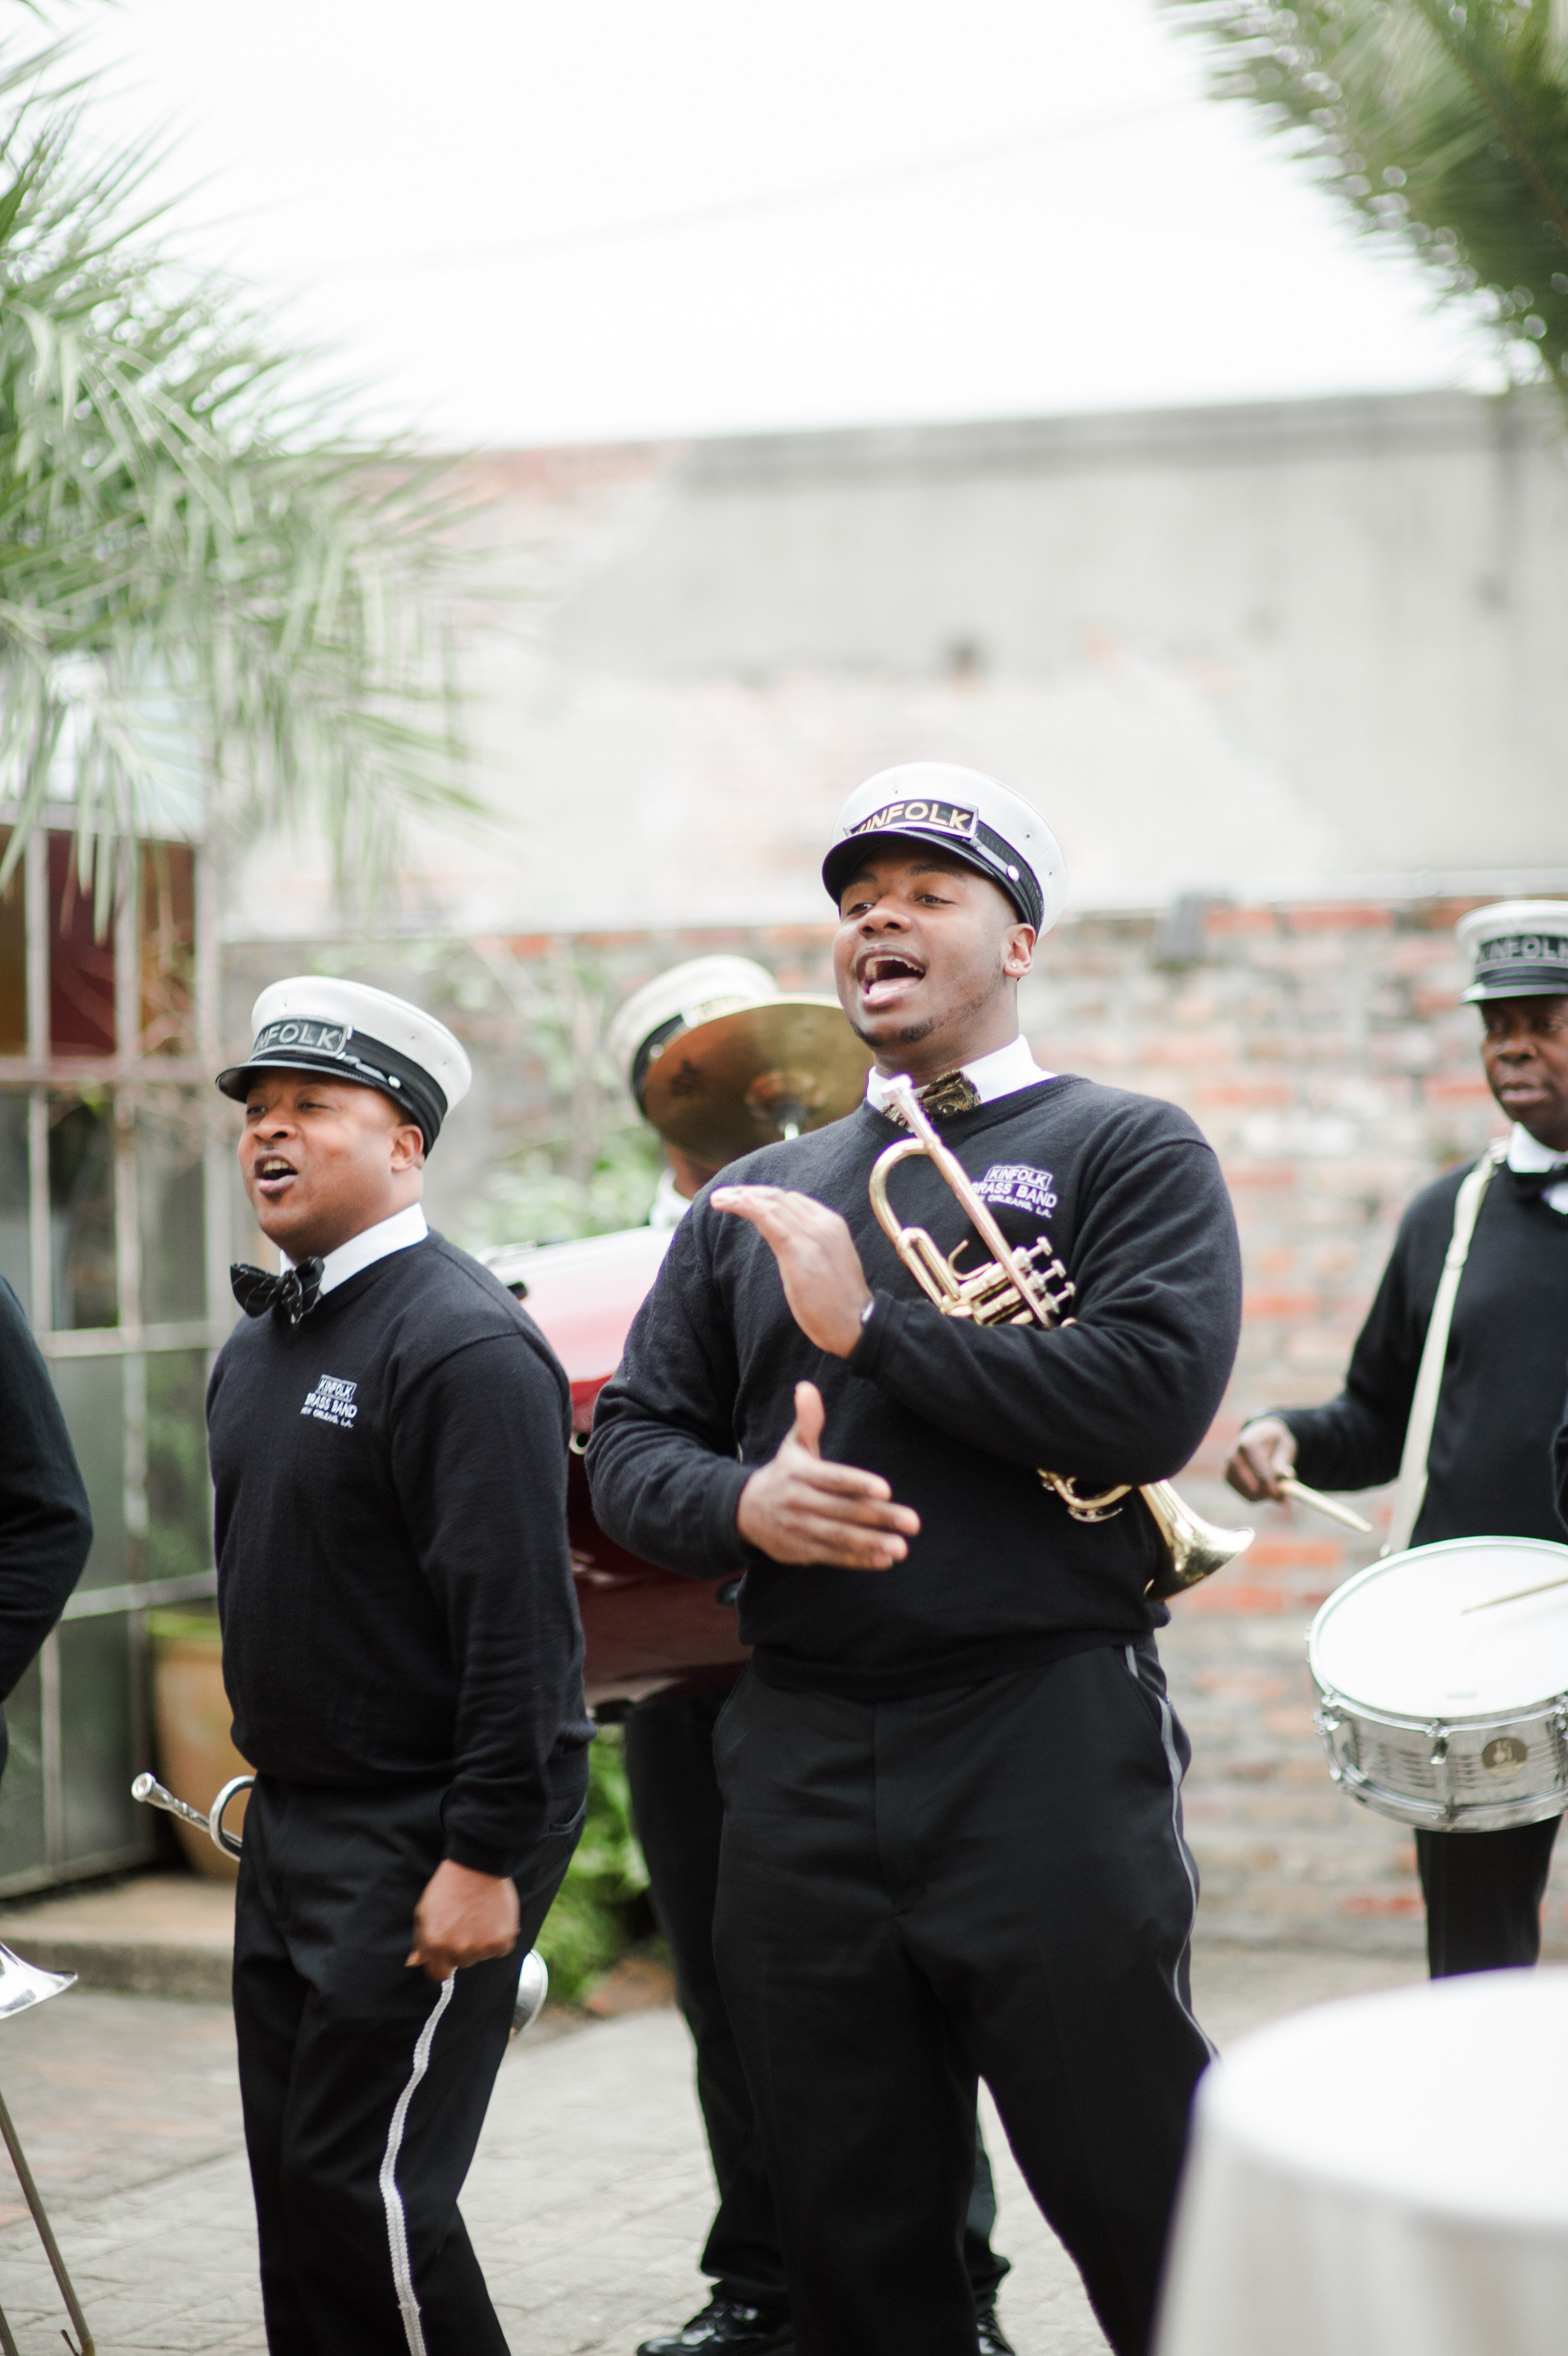 Kinfolk are an amazing New Orleans brass band that do second lines for weddings